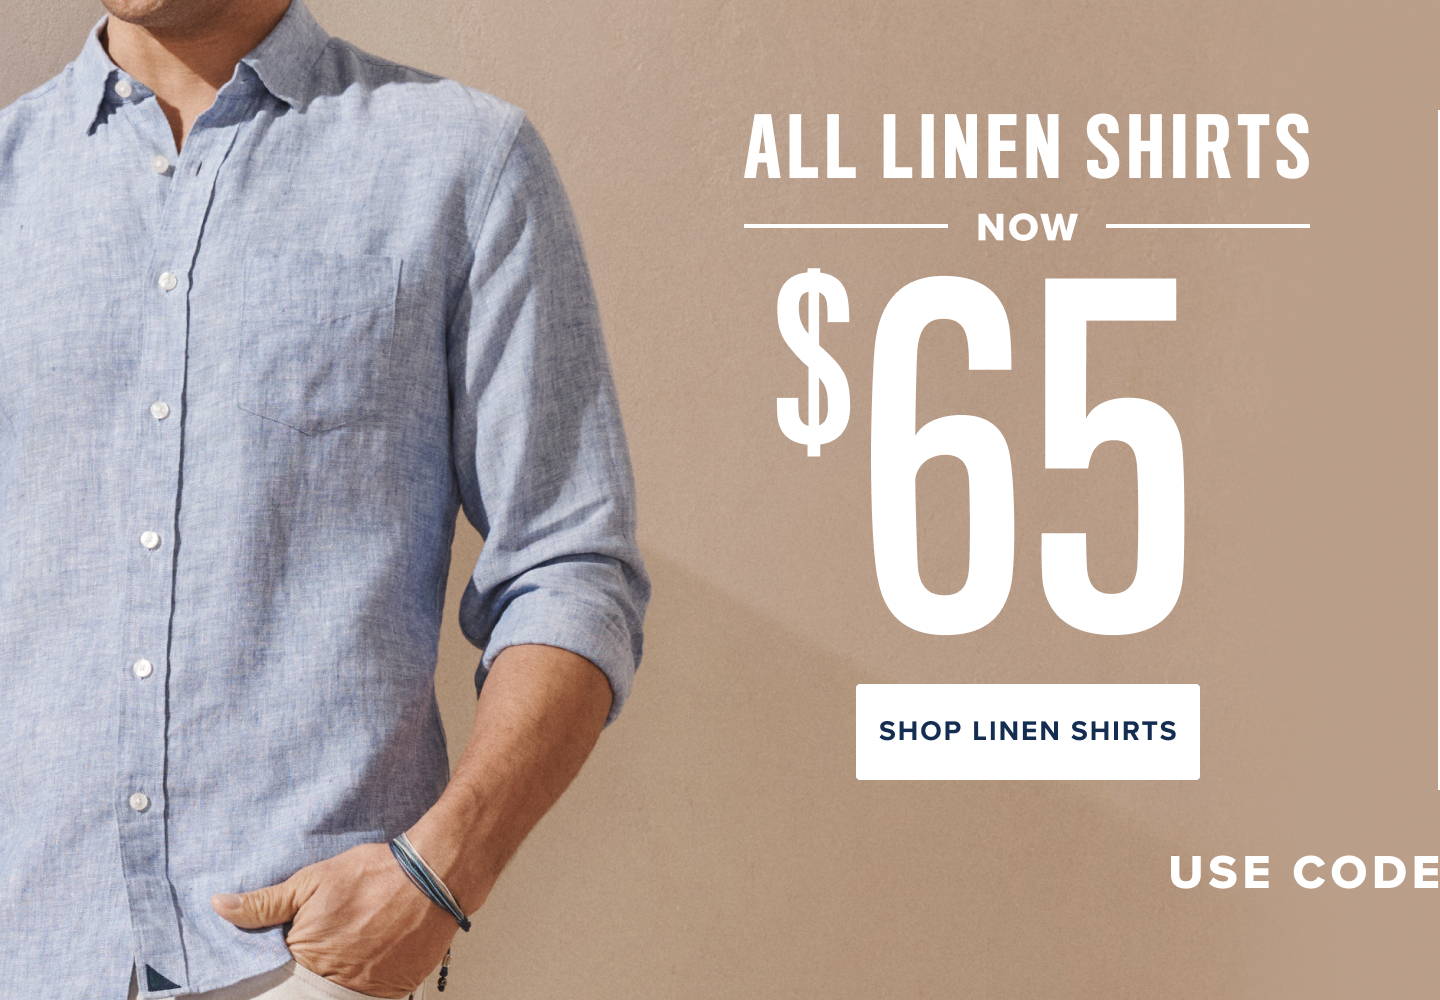 all linen shirts now $65. use code: summer